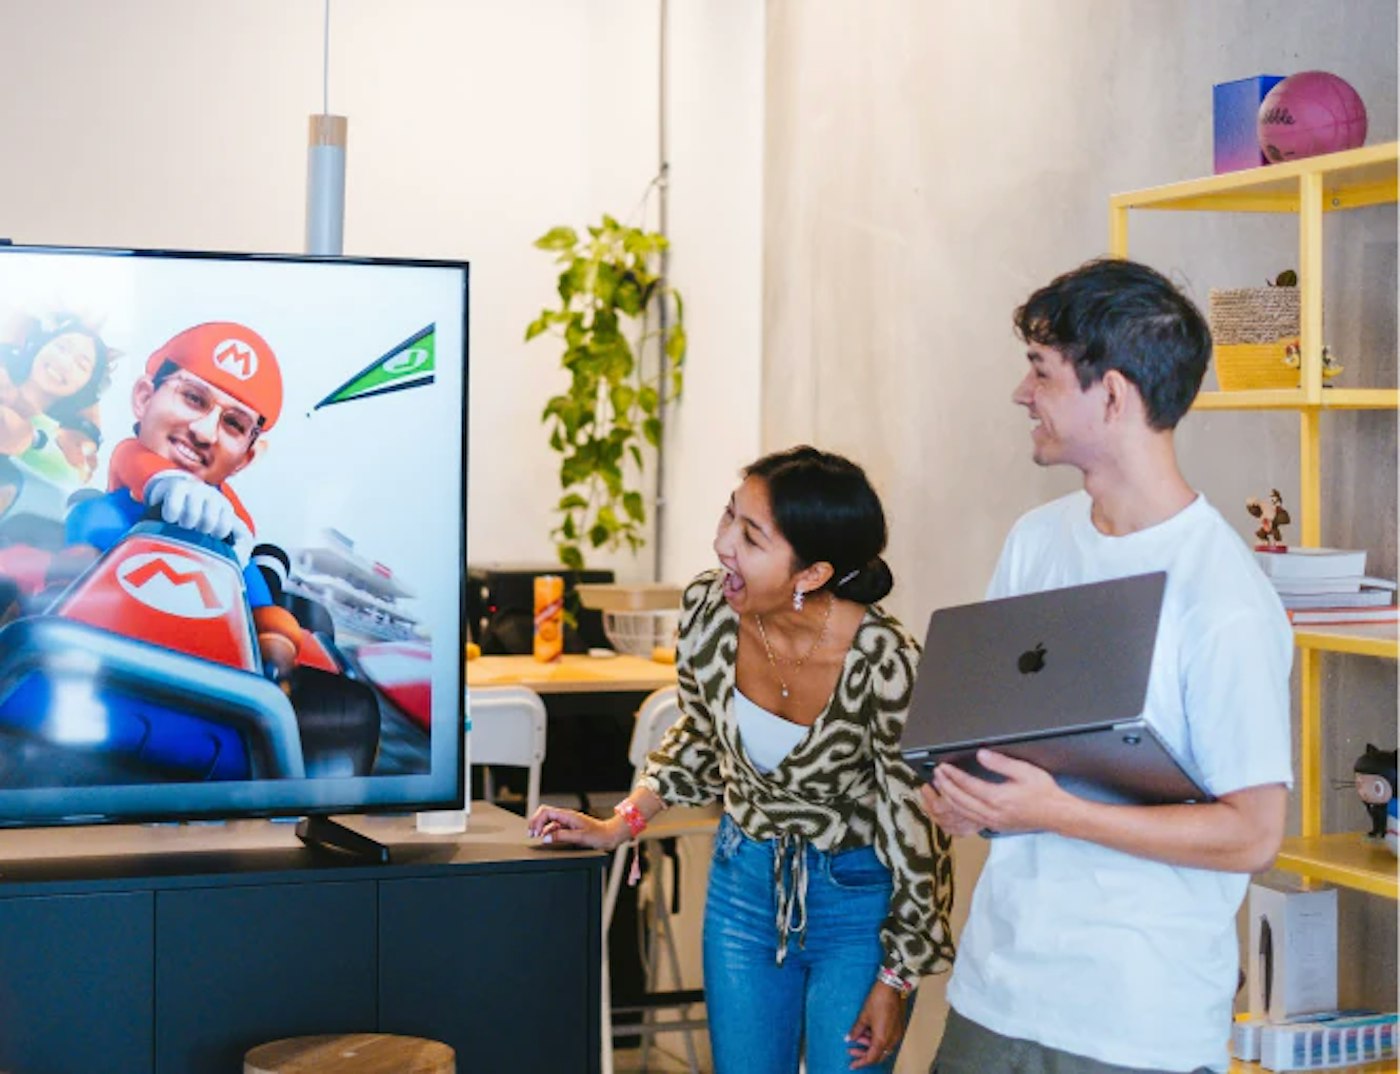 Two people looking and laughing at a television screen that shows a Mario Kart video game character with a face of a Yummygum team member pasted onto it.